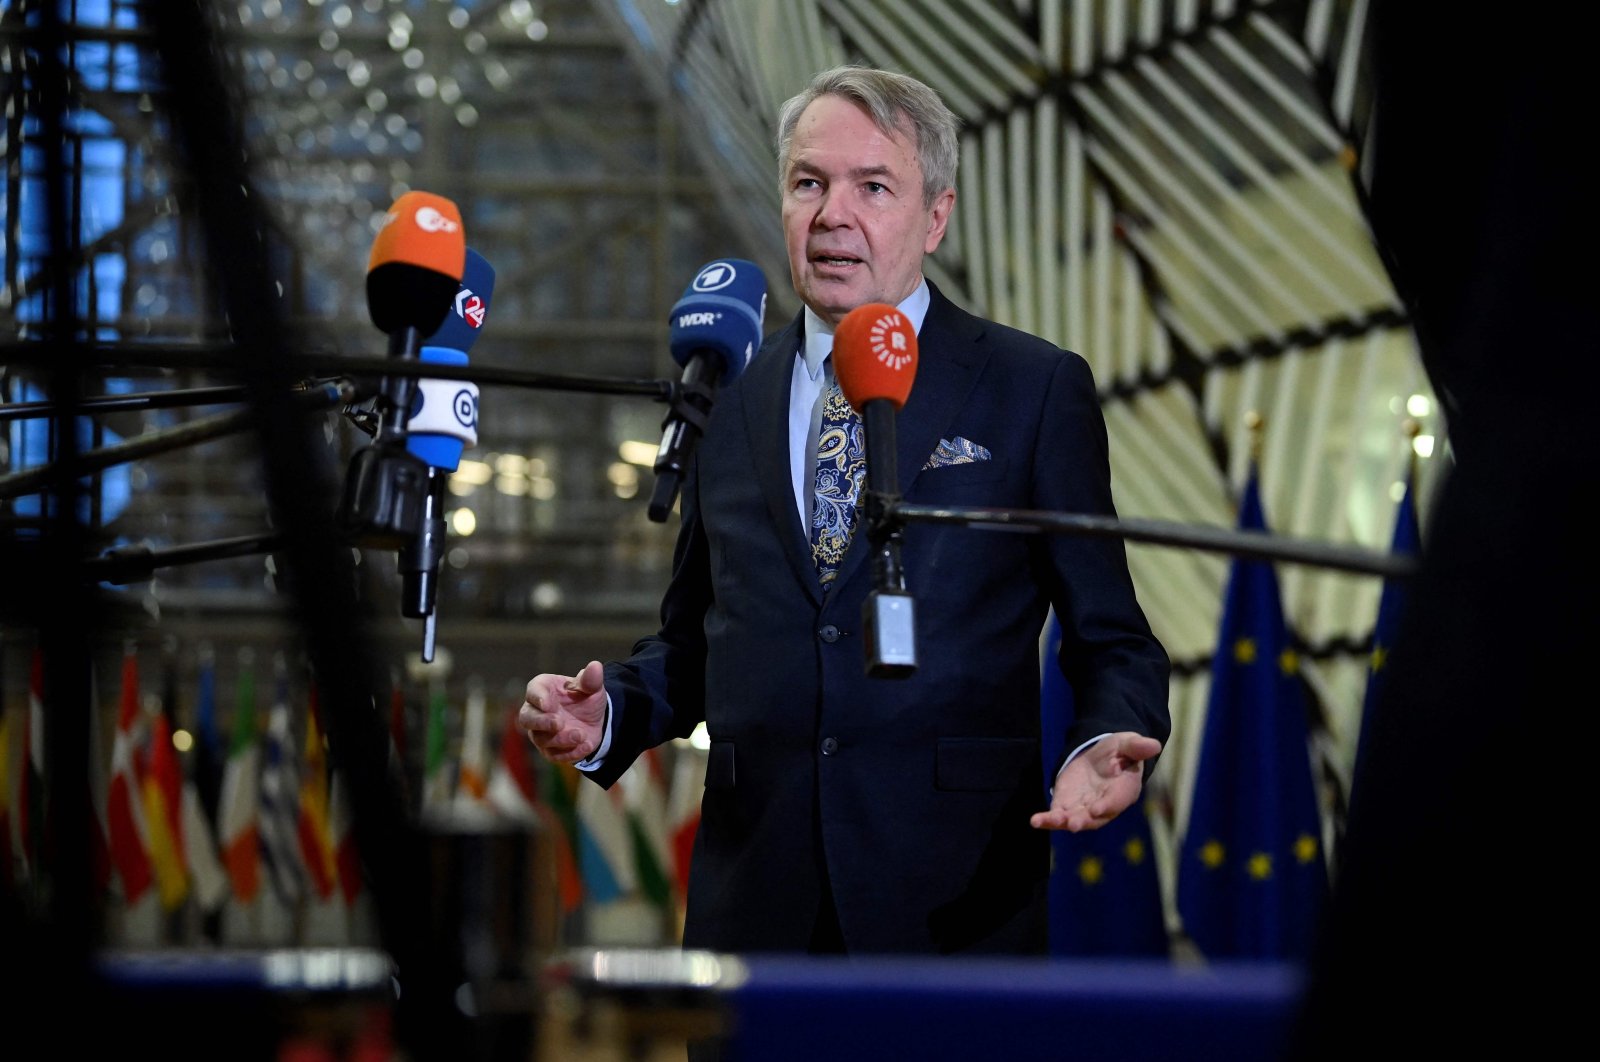 Finnish Foreign Minister Pekka Haavisto talks to the press during an EU foreign ministers meeting in Brussels, Belgium, Jan. 23, 2023. (AFP Photo)